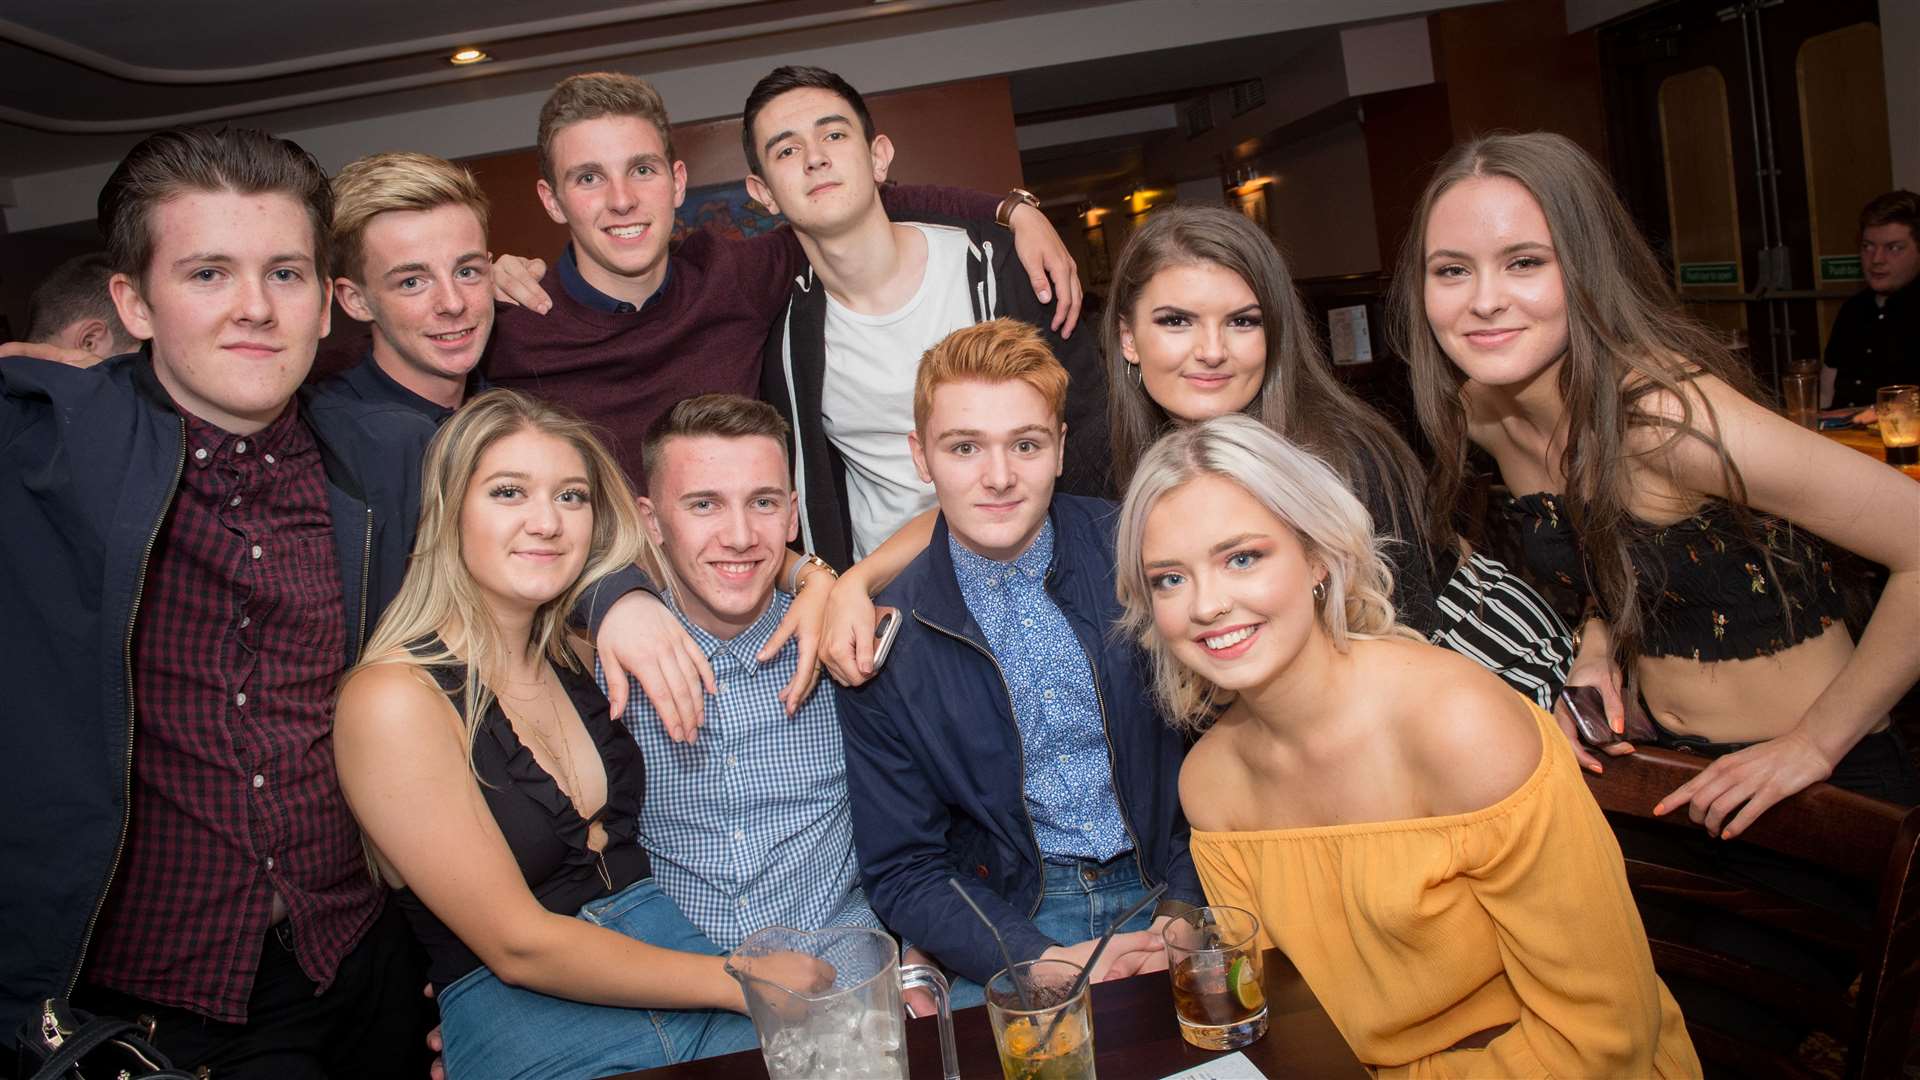 Celebrating his 18th birthday with friends is Tommy Mclenaghan (back, third left).